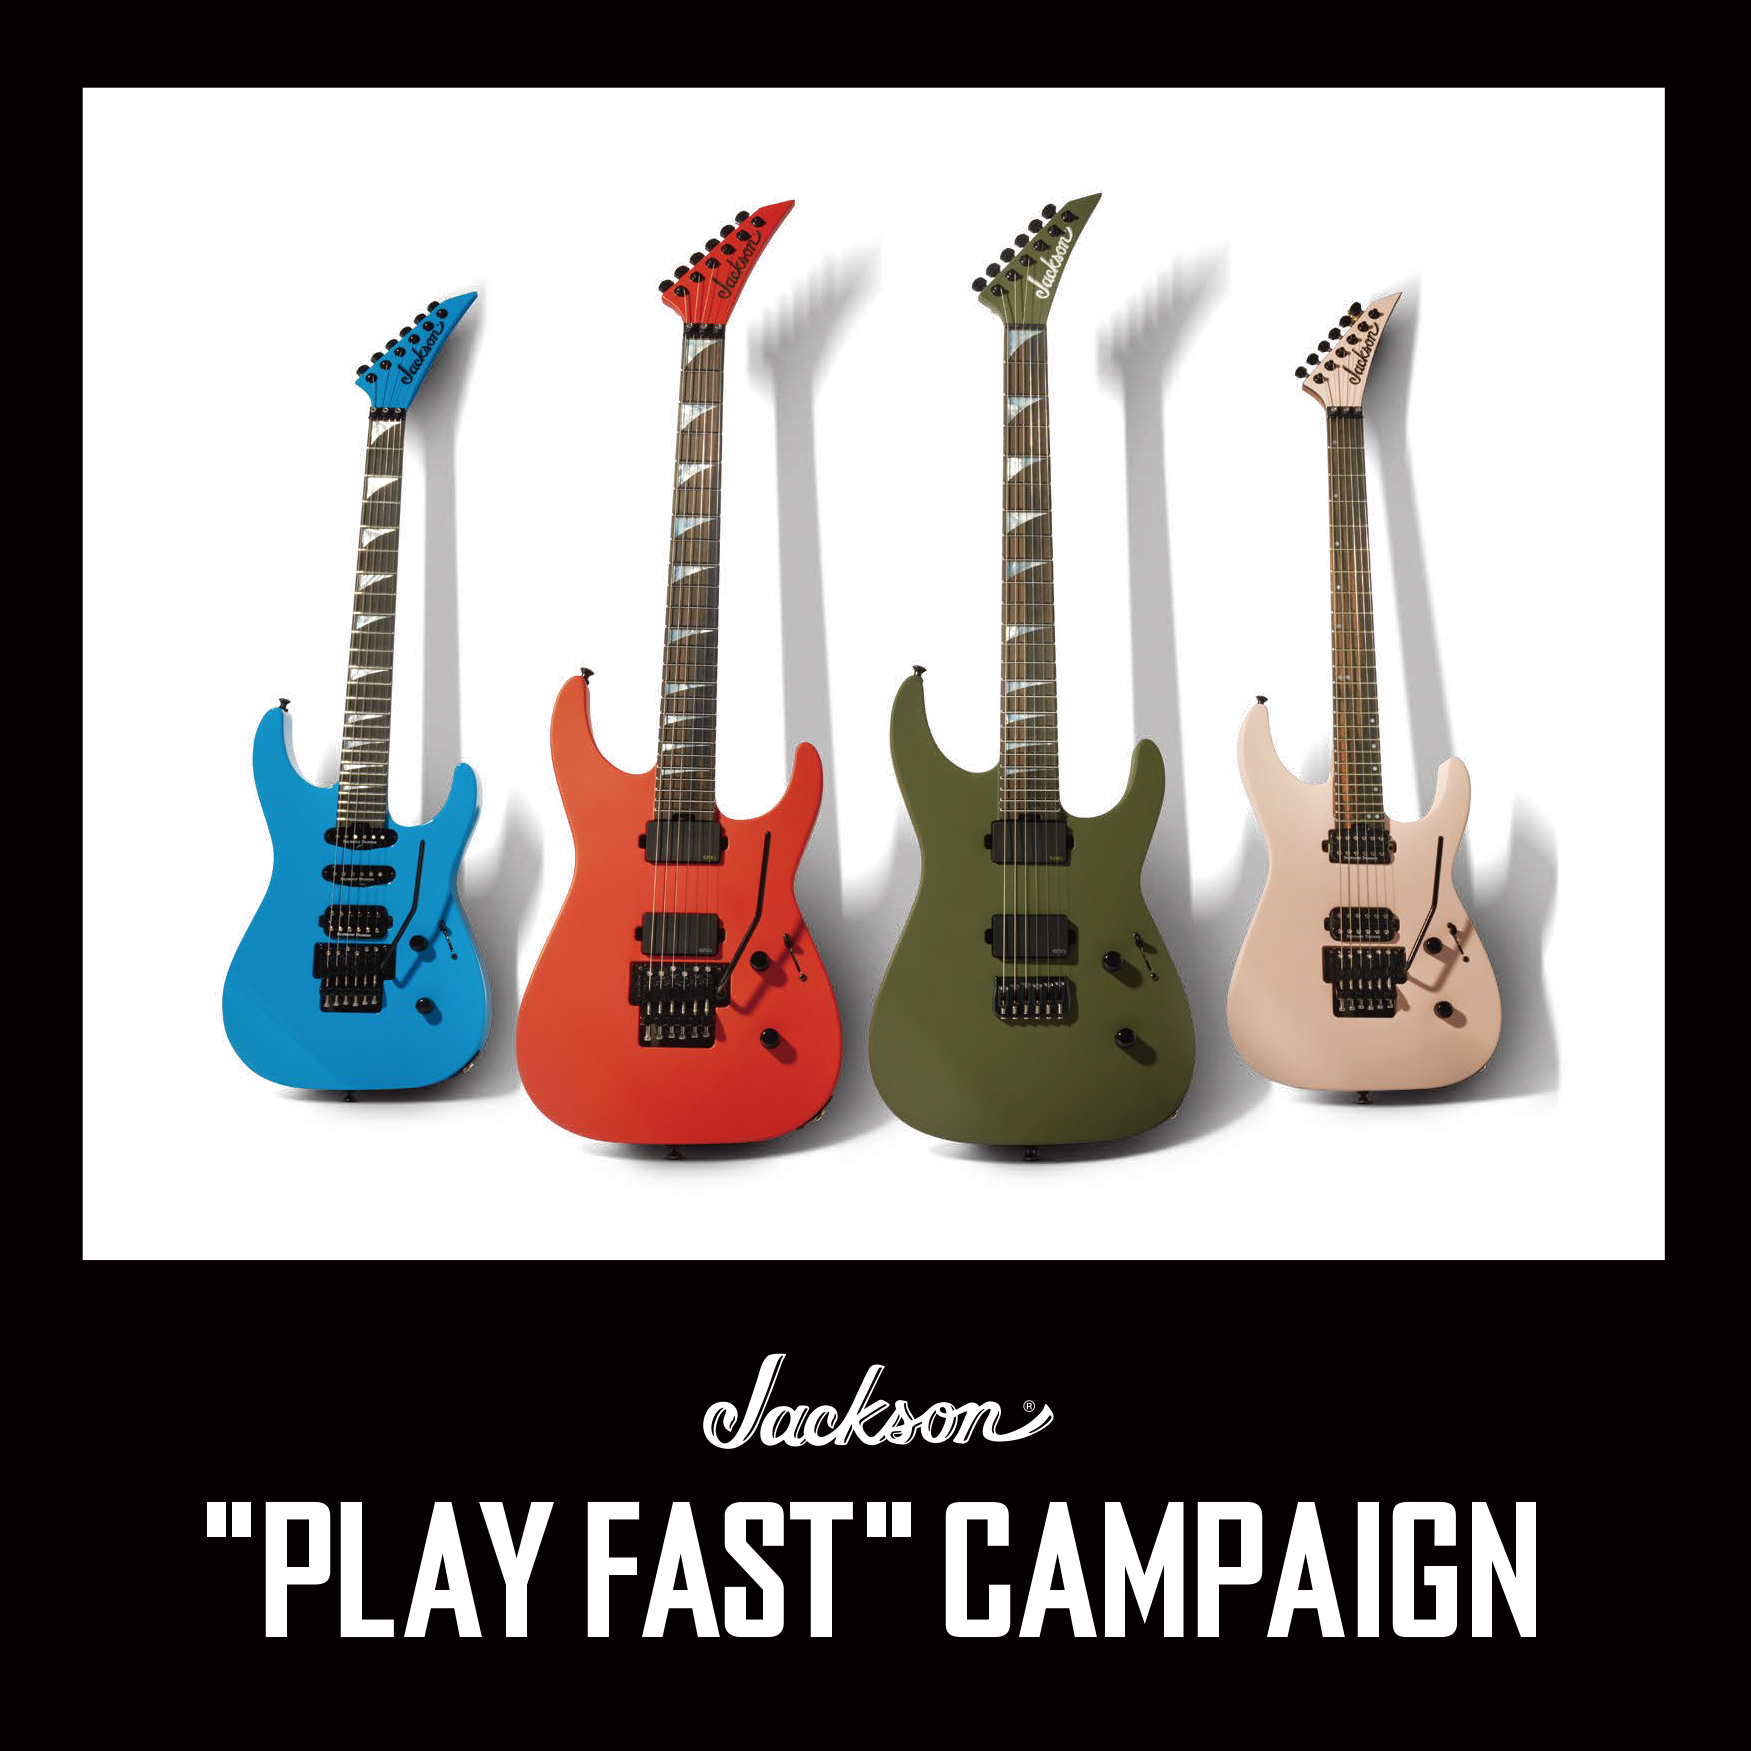 Jackson ”PLAY FAST” Campaign